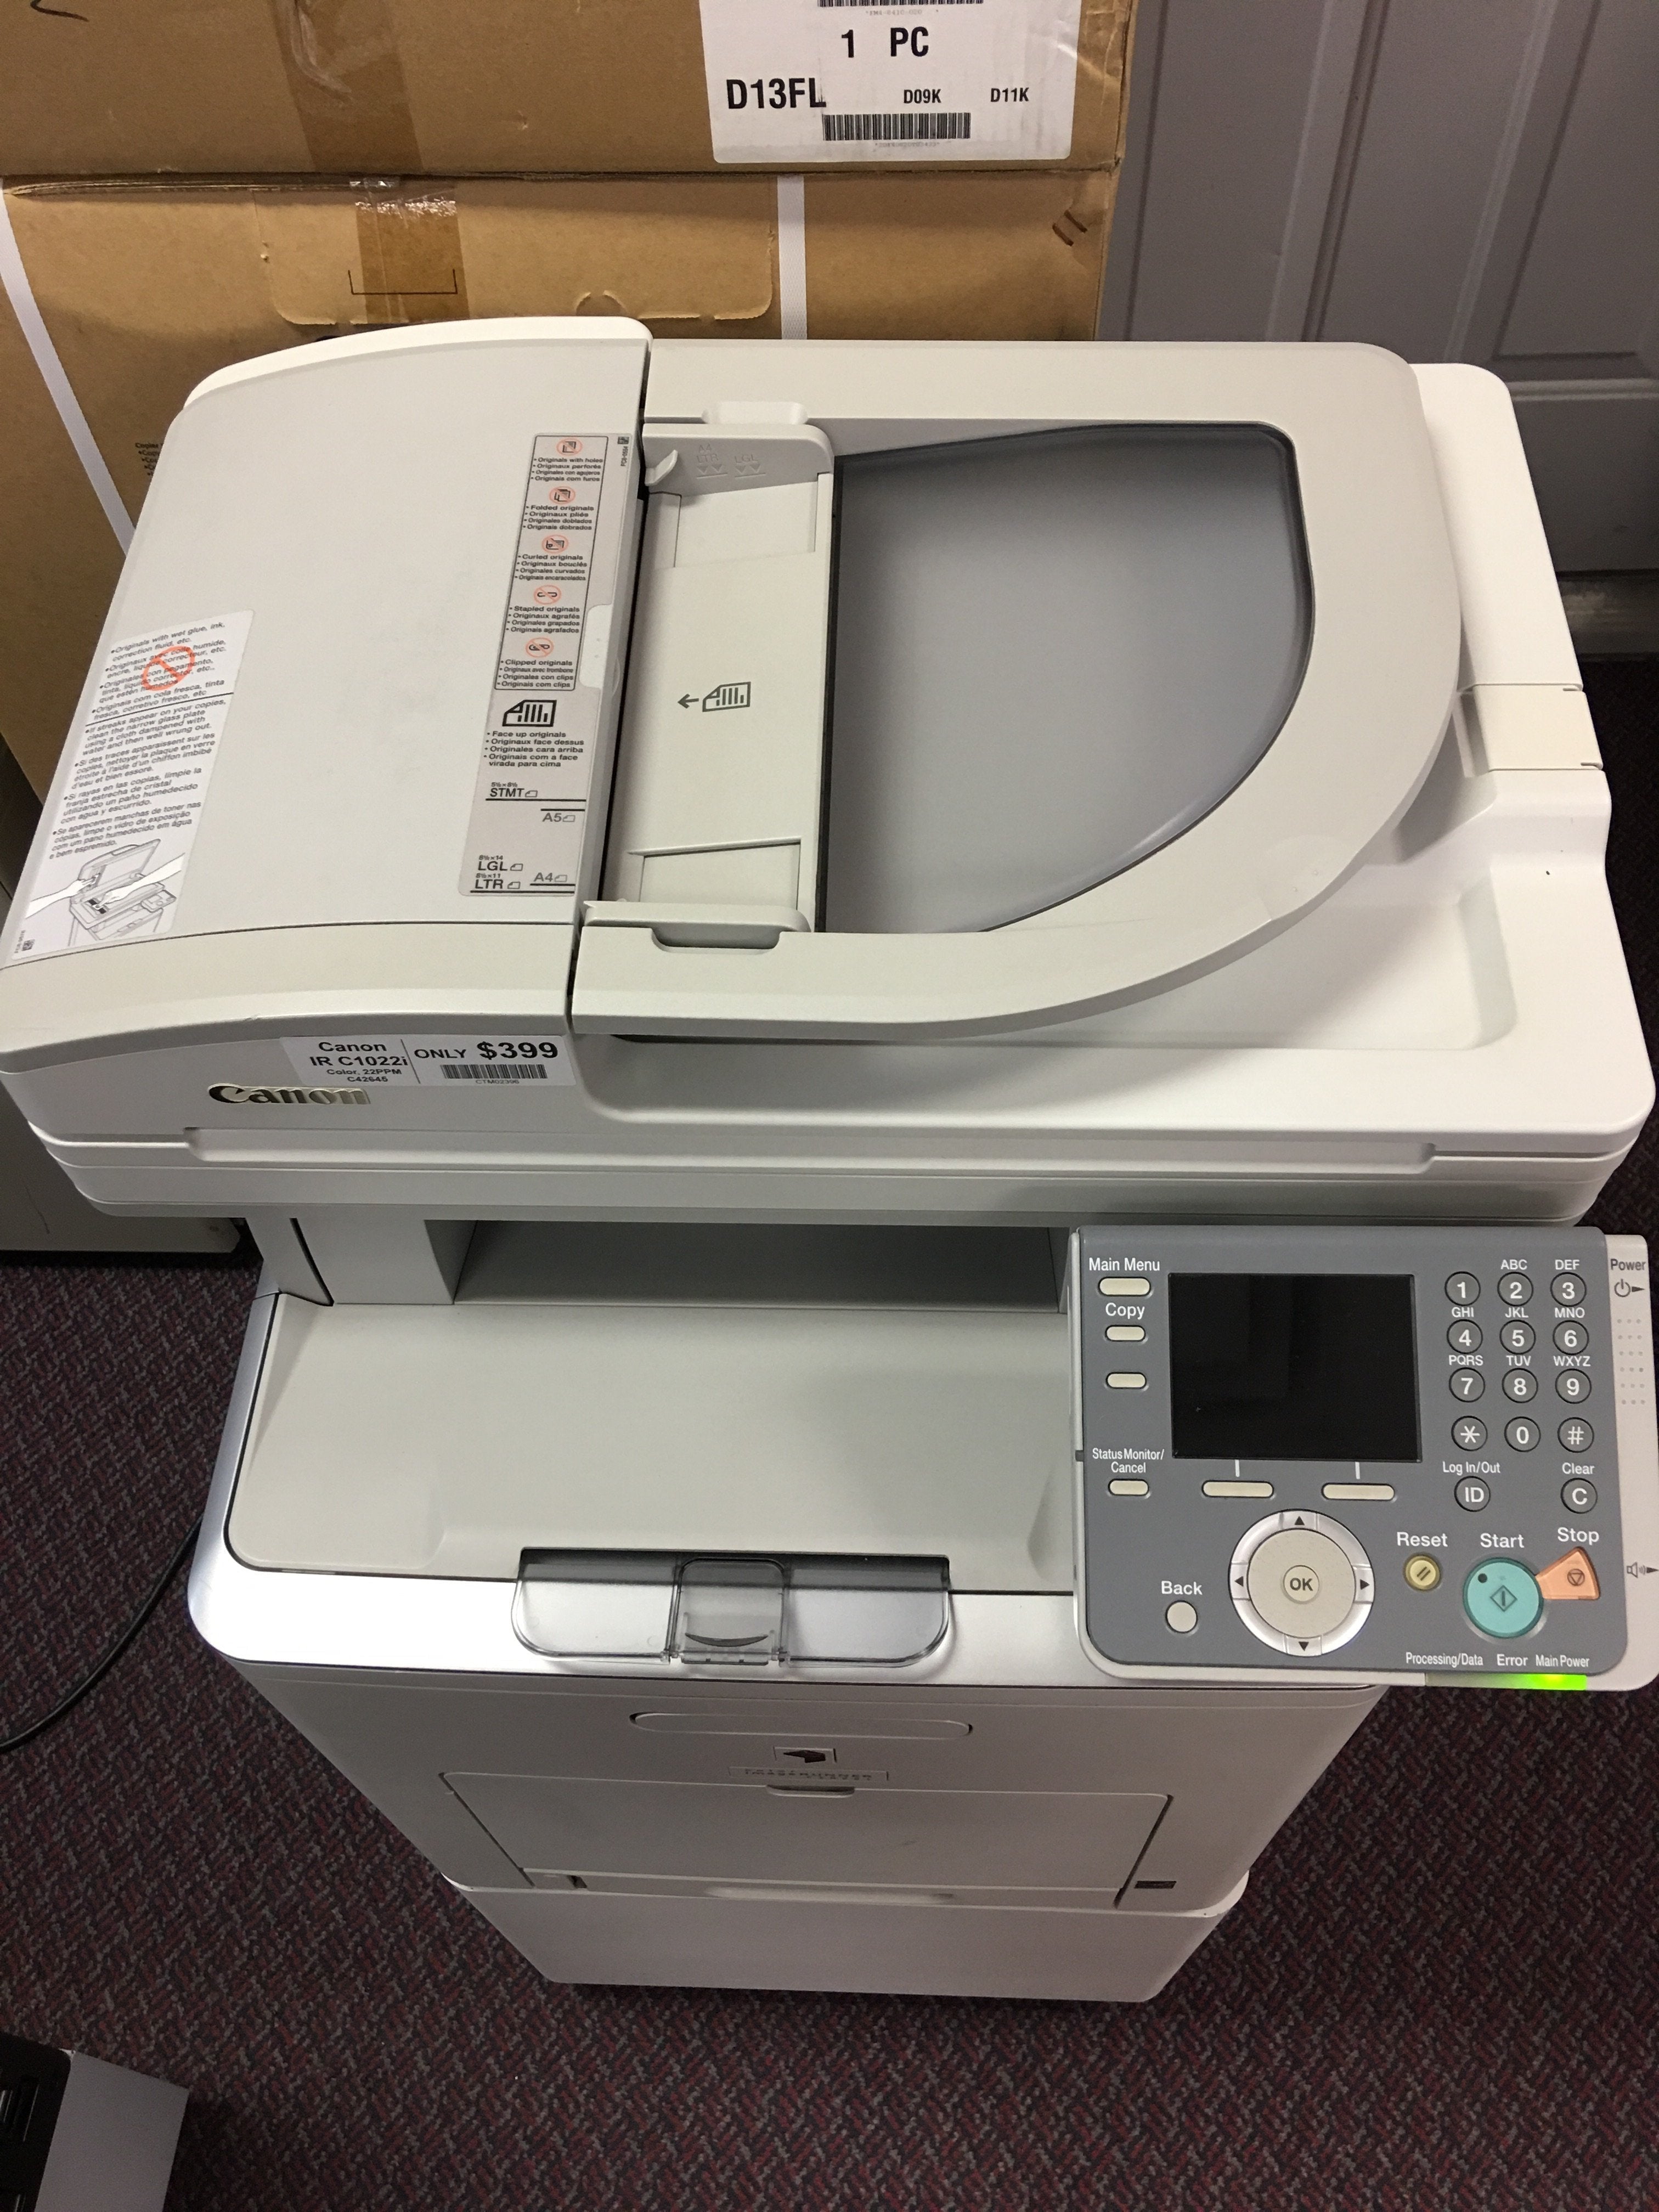 Absolute Toner Pre-owned Canon imageRUNNER C1022i 1022 Color Copier Printer Scanner Highly Reduced Price Office Copiers In Warehouse